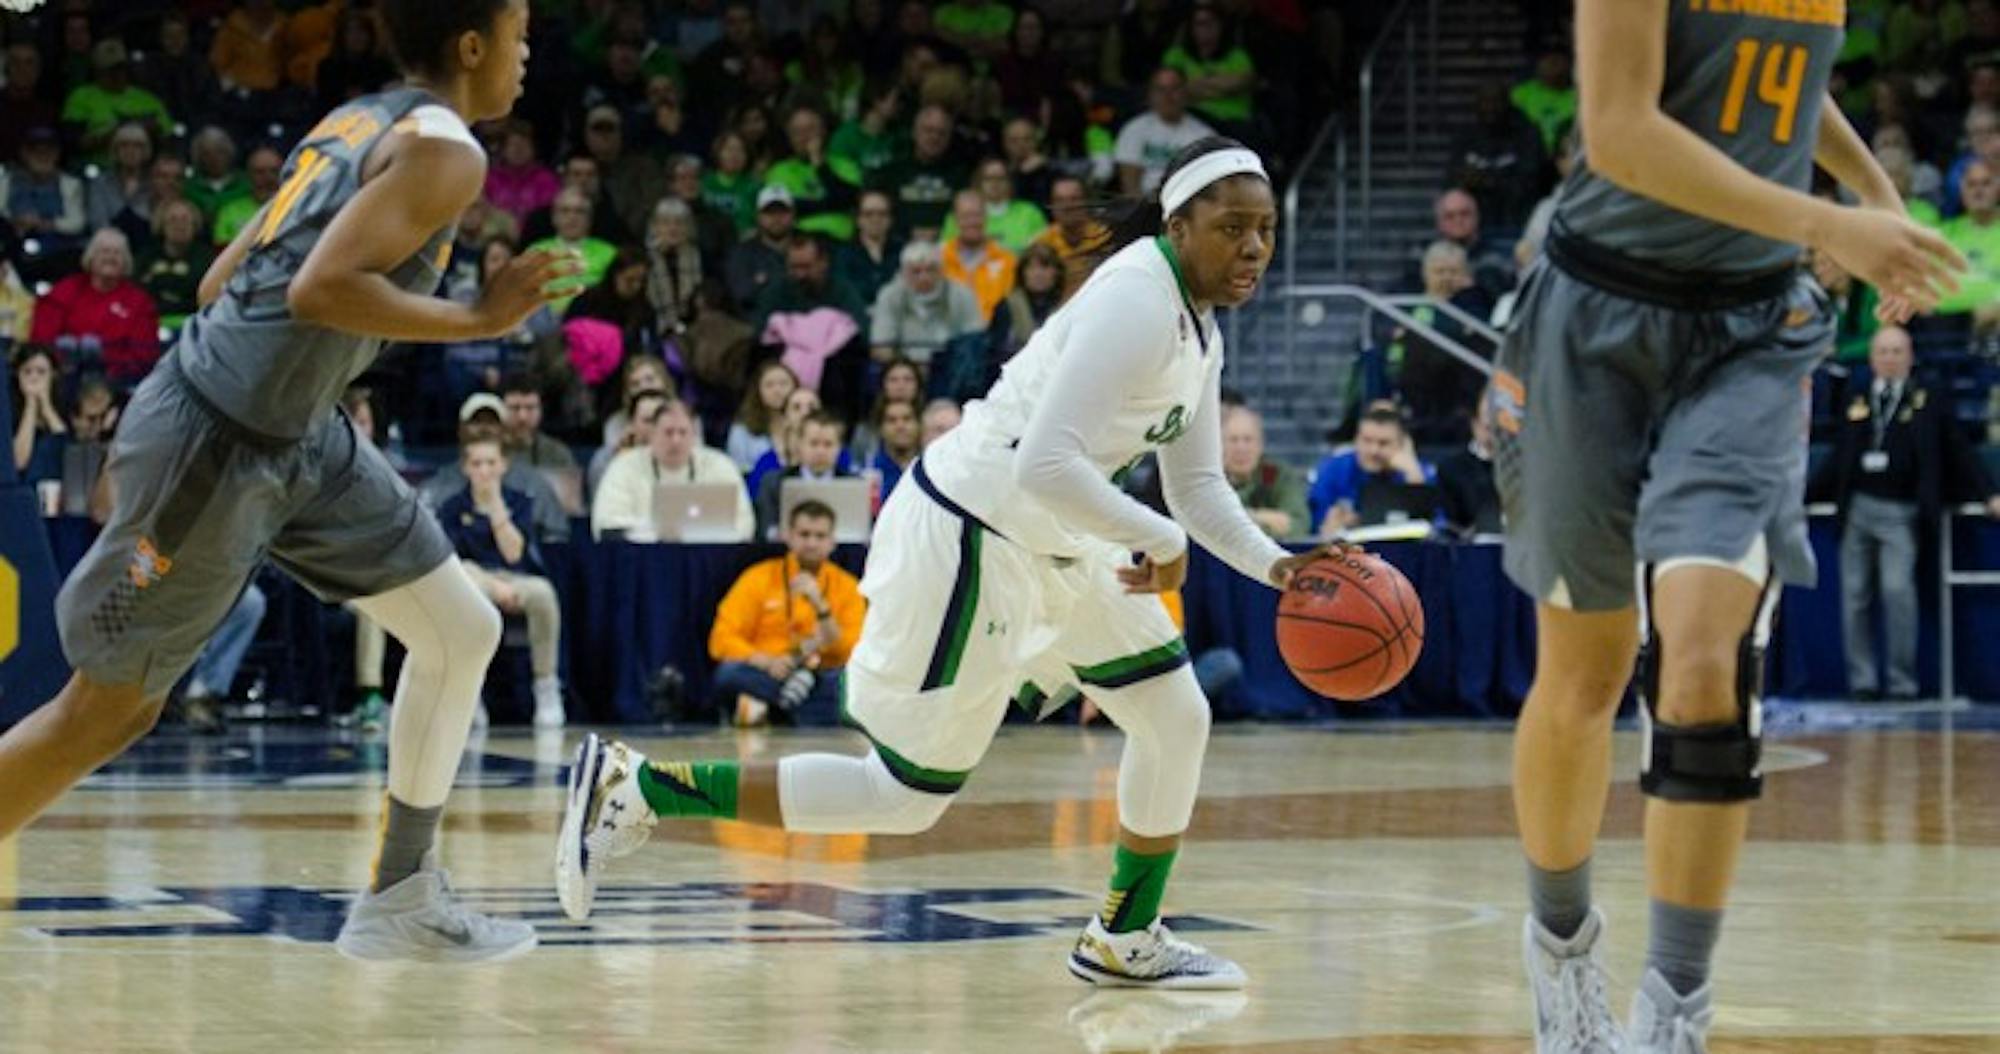 Irish freshman guard Arike Ogunbowale dribbles upcourt during Notre Dame’s 79-66 victory over Tennessee on Jan. 24 at Purcell Pavilion. Ogunbowale scored 15 points, grabbed six rebounds and dished out two assists during Notre Dame’s 80-41 win over Virginia Tech on Sunday.